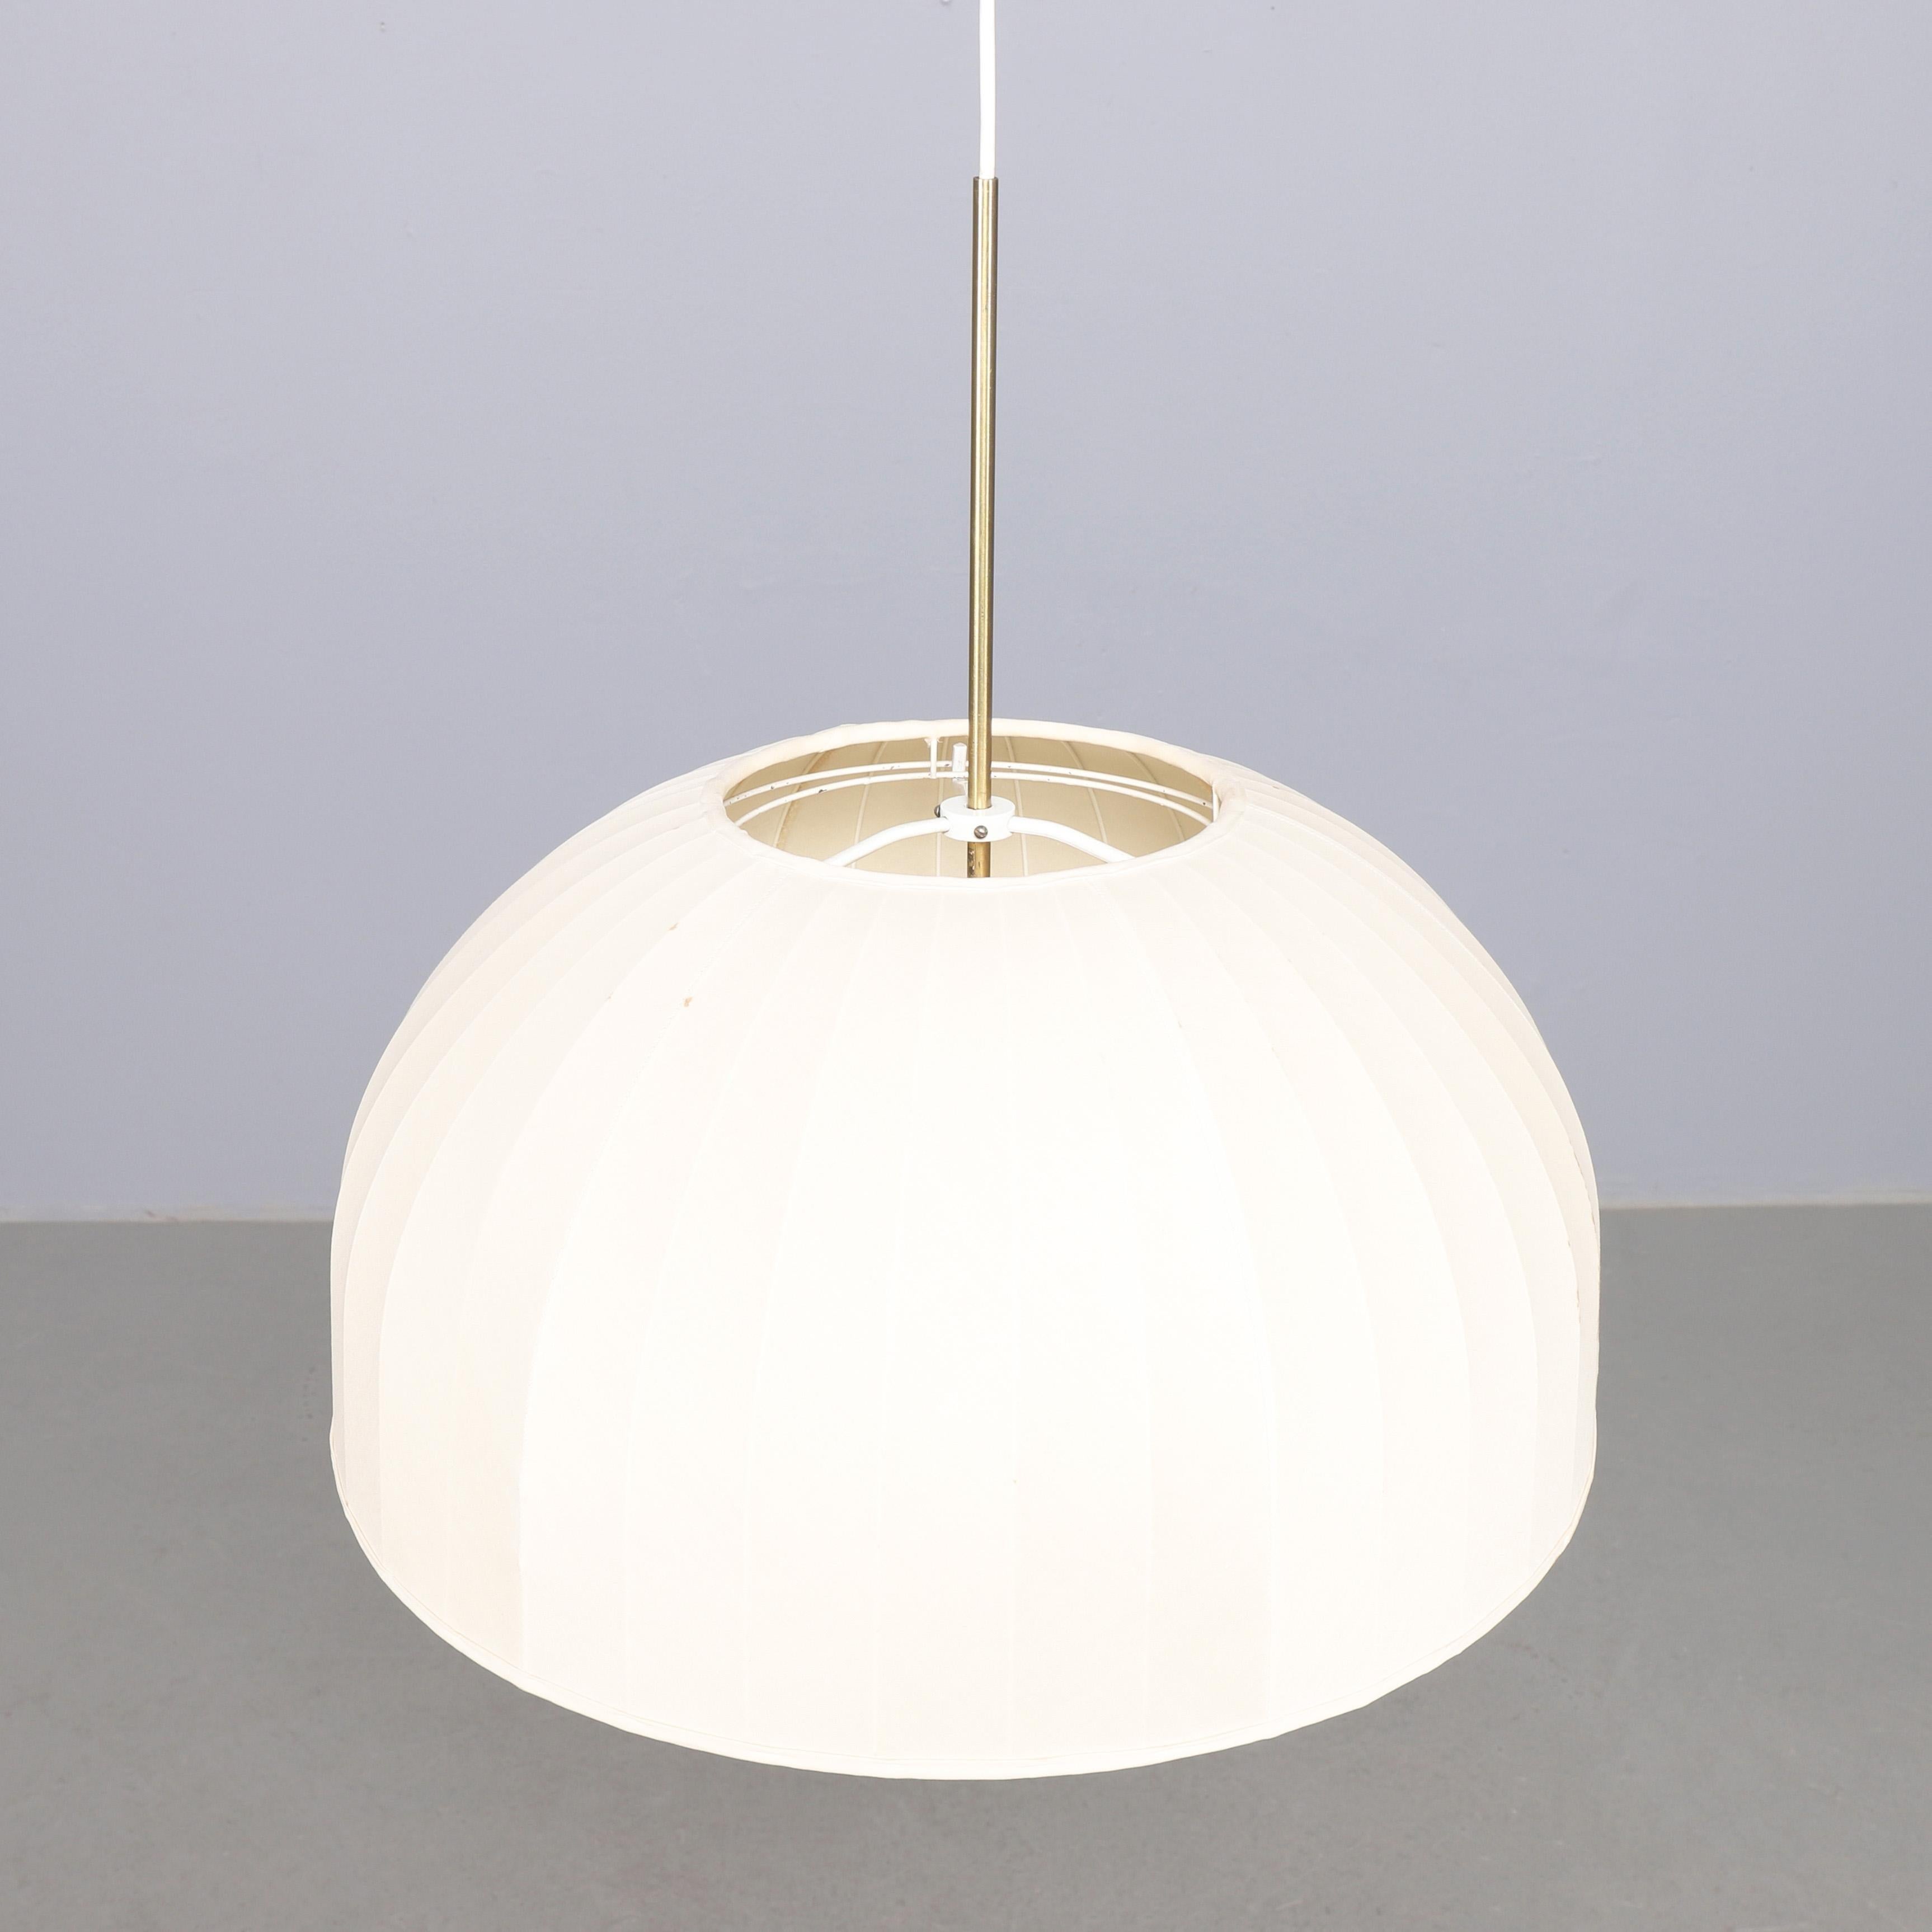 Rare large ceiling pendant with new shade in cream/white fabric on white lacquered metal mount. 
Model Carolin T549/6 in brass designed 1963 by Hans-Agne Jakobsson. Lamp itself and the shade are height adjustable.
6 x E27 bulbs.
